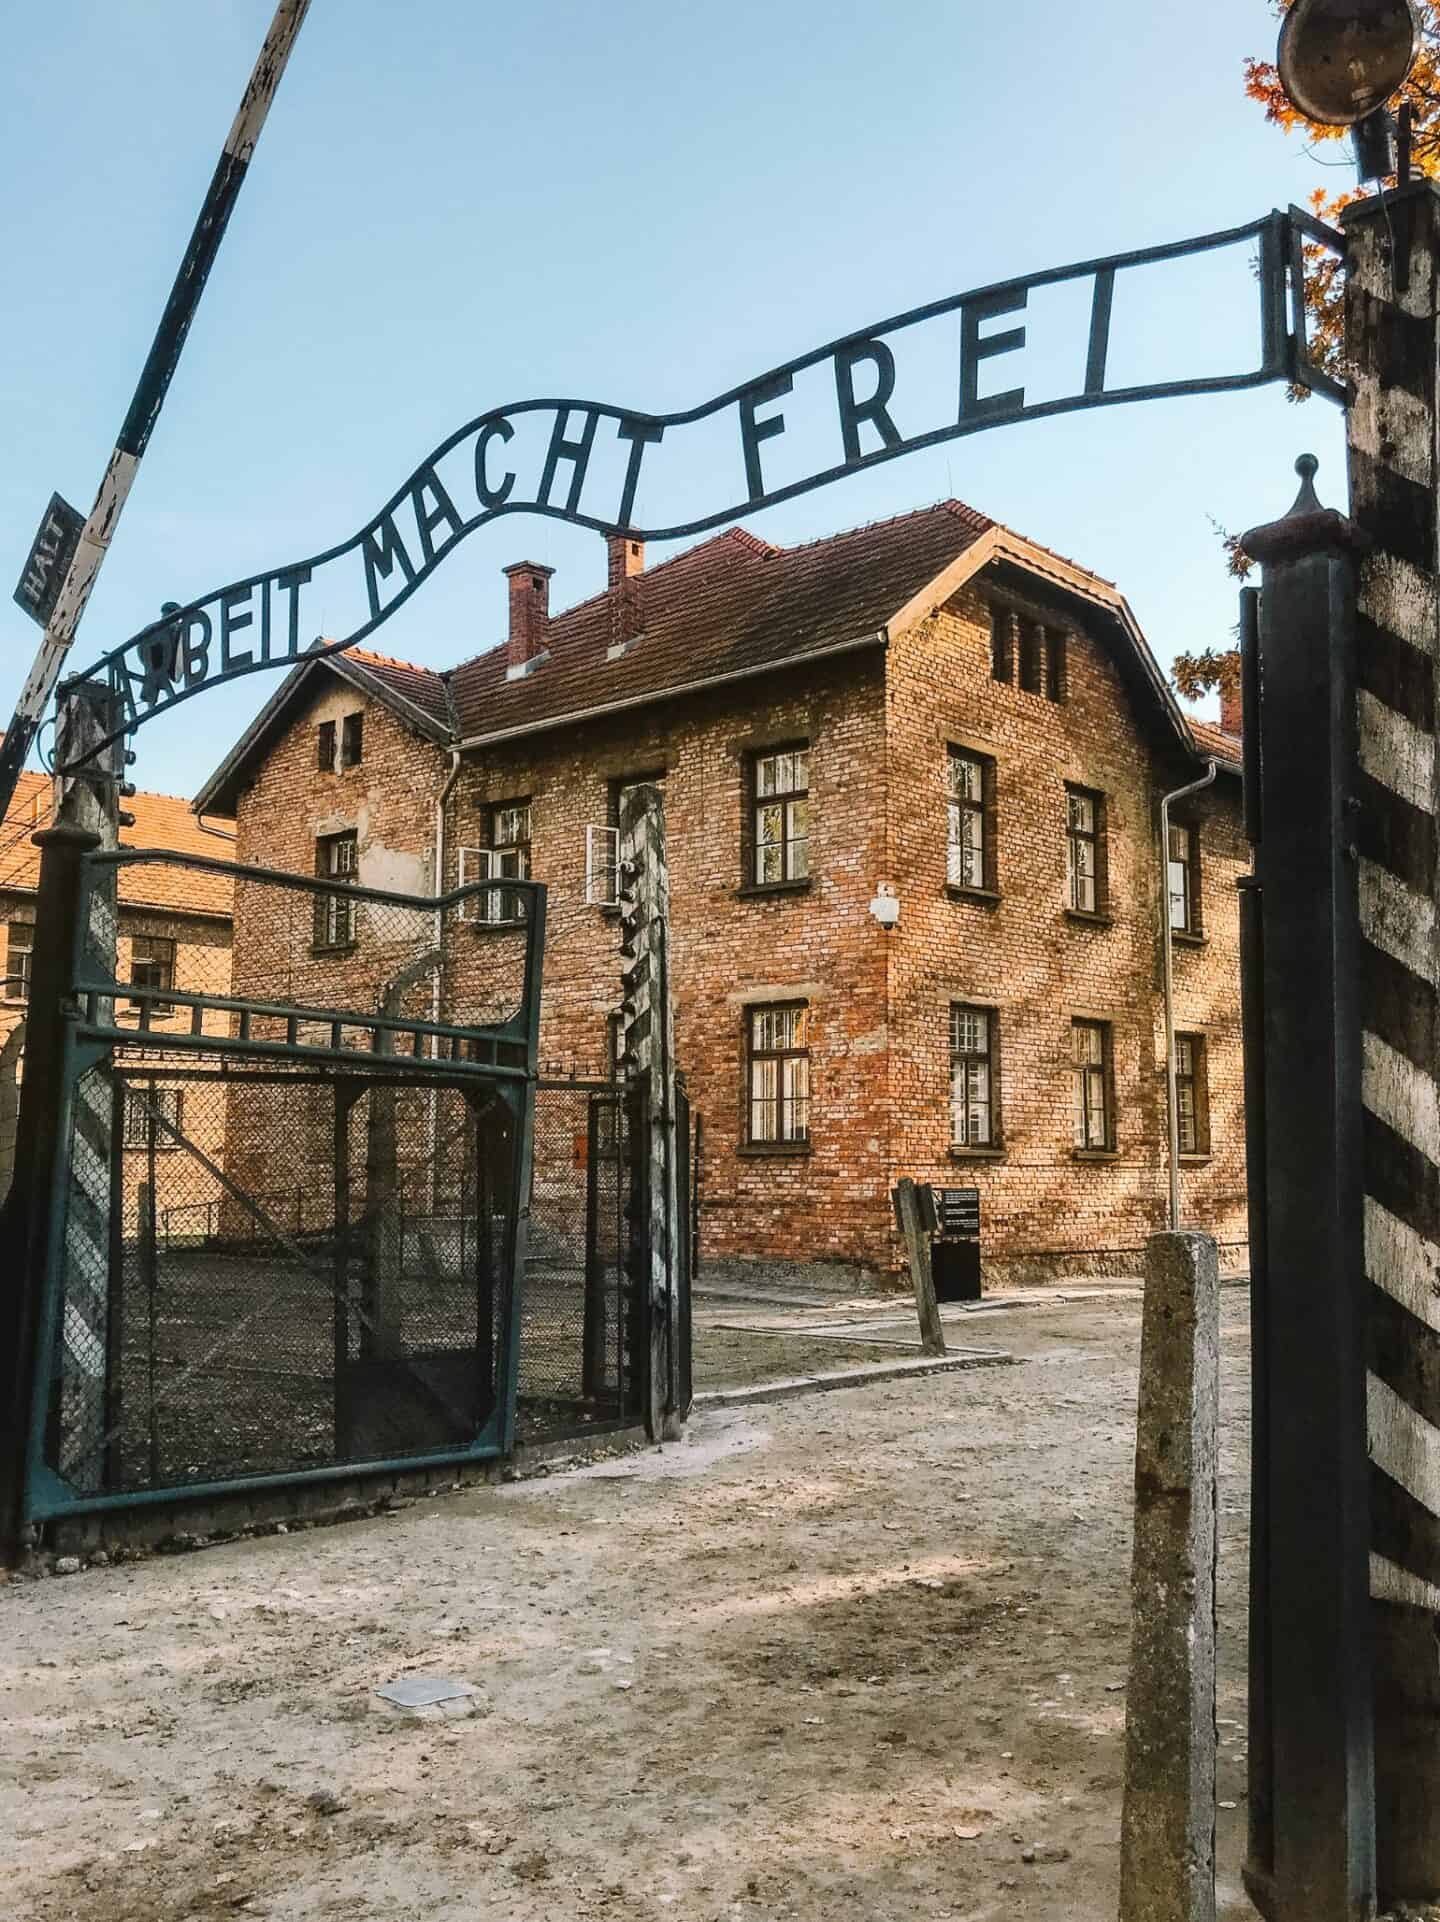 Arbeit Macht Frei gate at Auschwitz concentration camp outside of Krakow